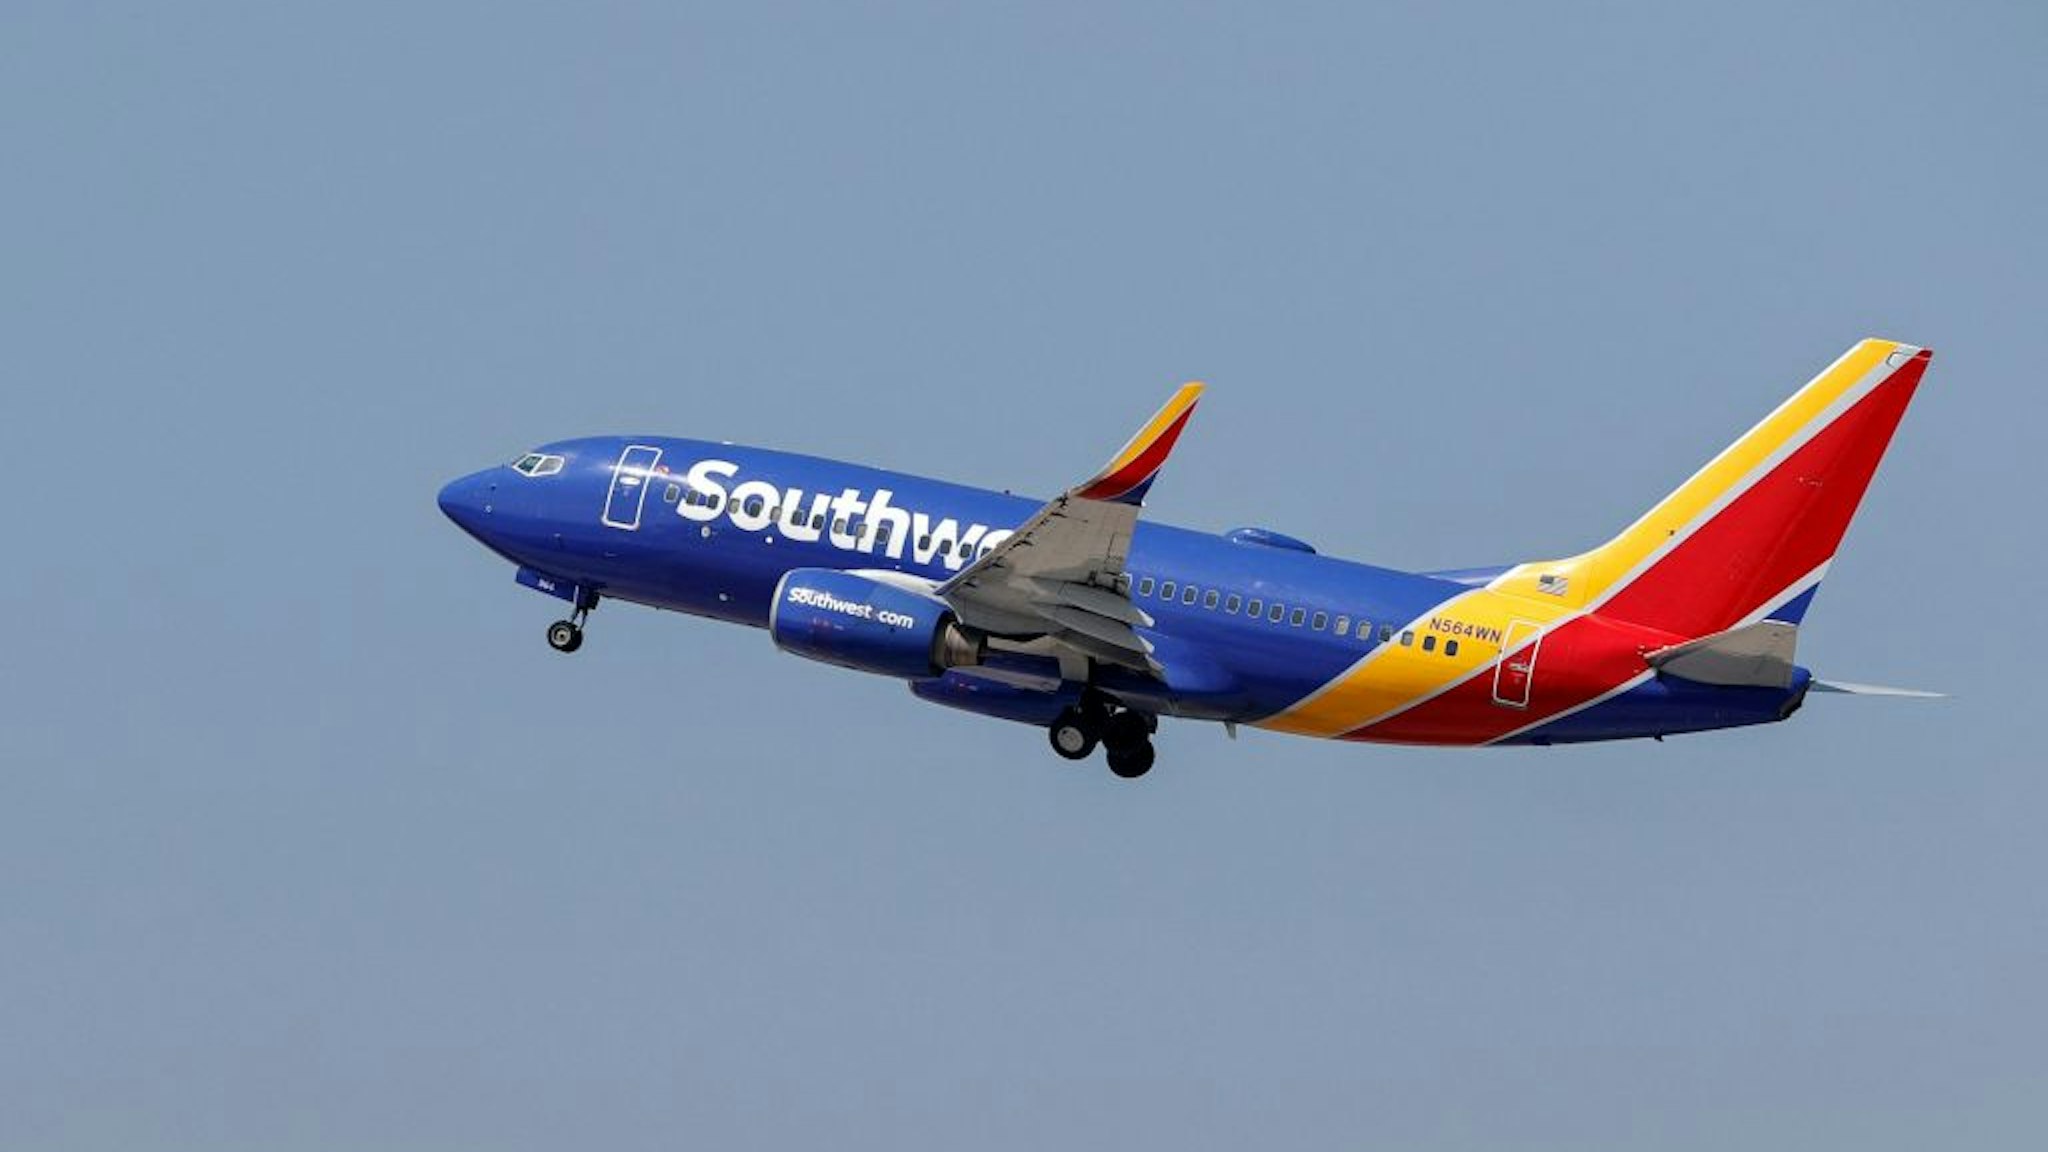 A Southwest Airlines Boeing 737-73V jet departs Midway International Airport in Chicago, Illinois, on April 6, 2021.